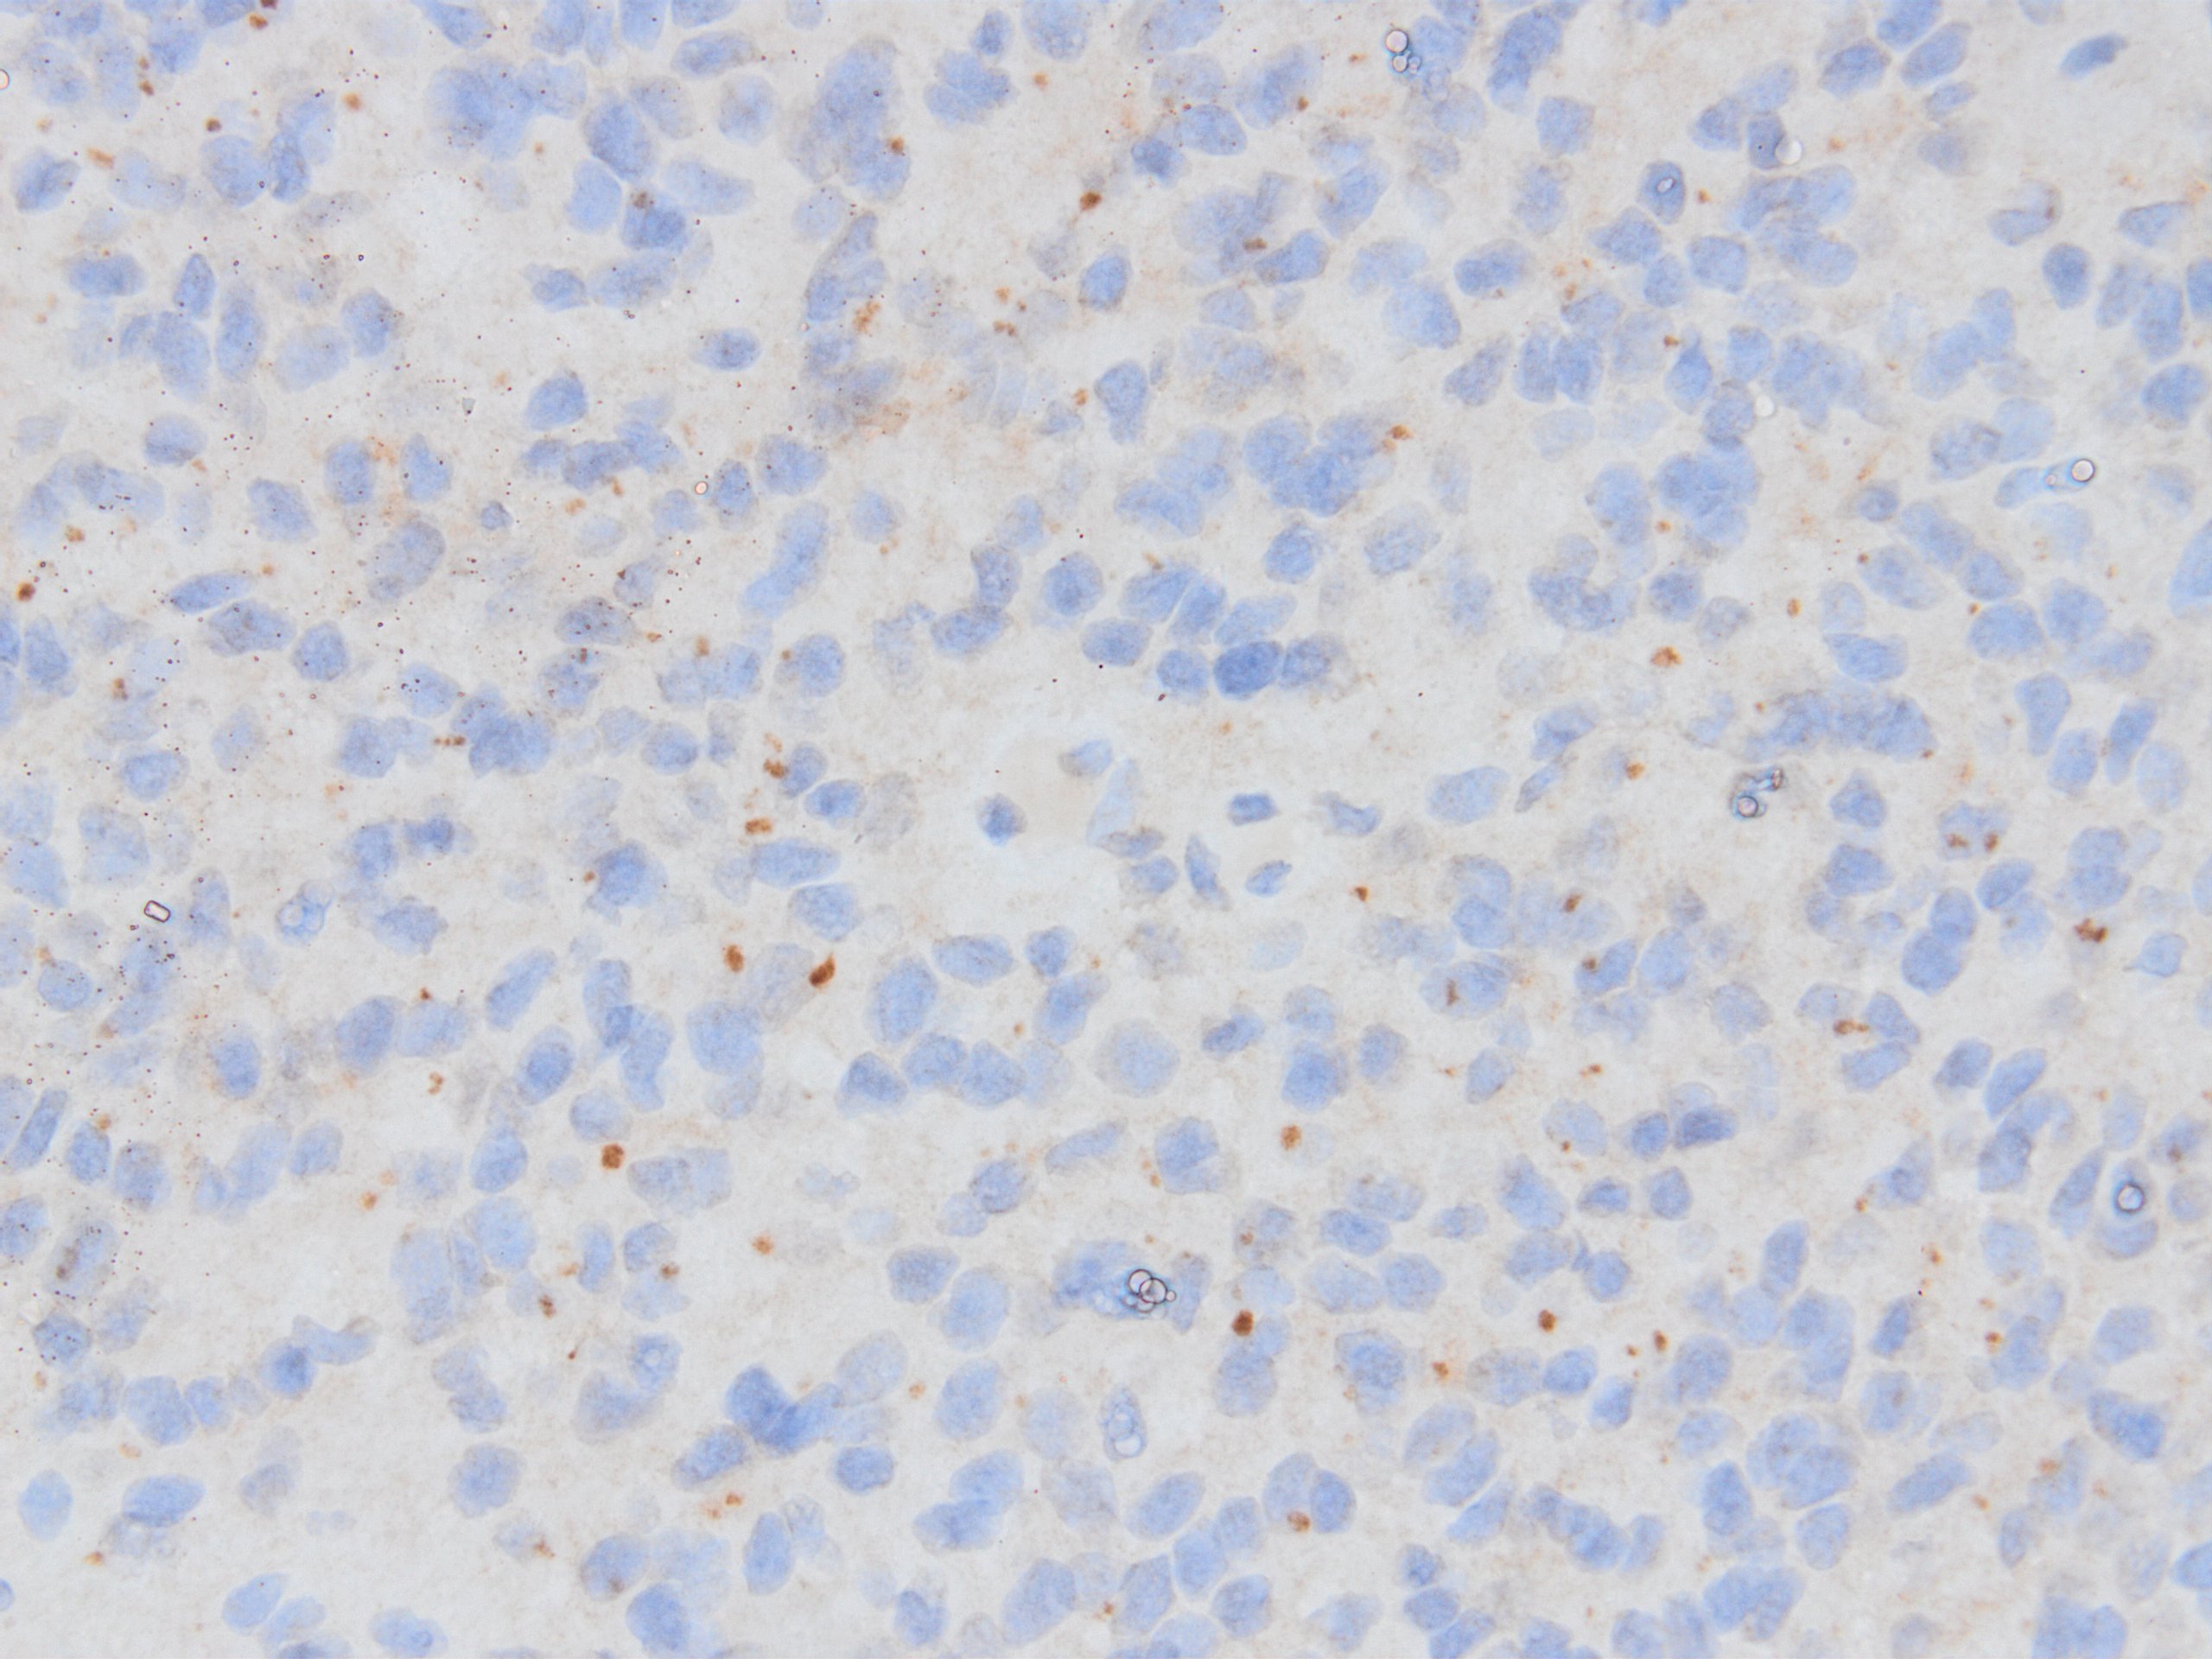 D2-40 expression in ependymoma